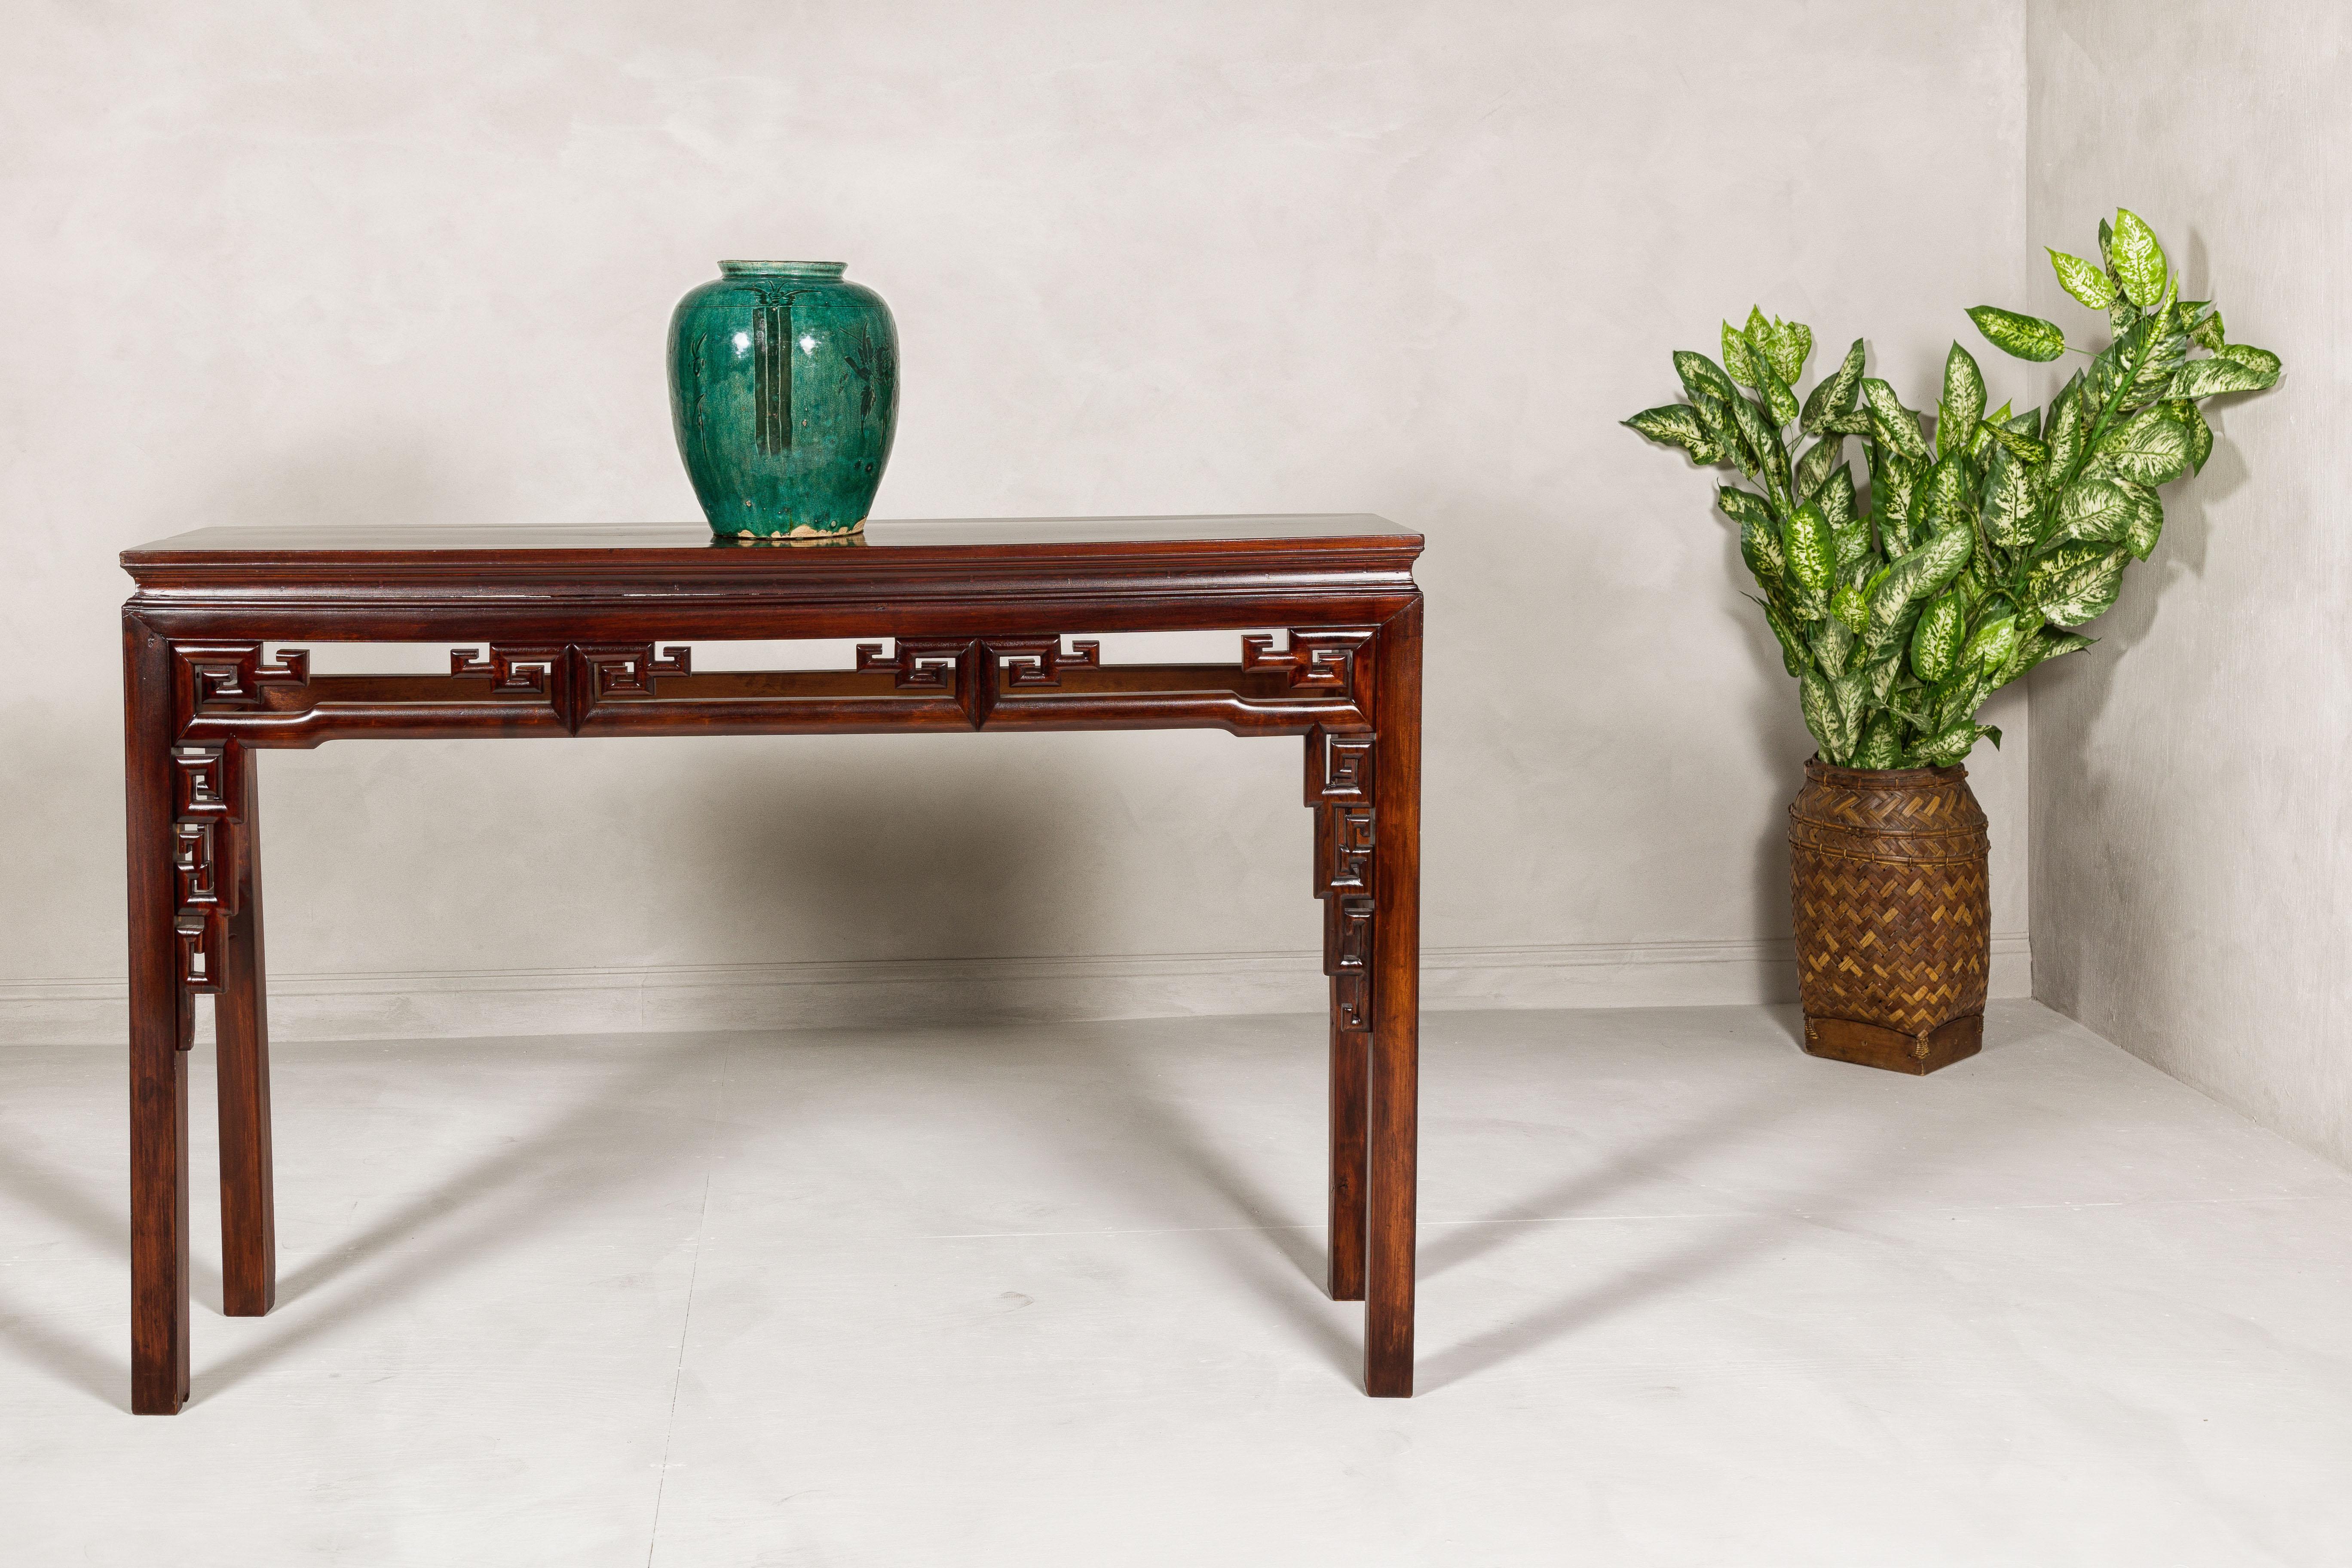 A vintage Chinese carved altar or scroll table from the mid 20th century with meander carved apron and lateral humpback stretchers. This mid-20th century vintage Chinese altar or scroll table has been beautifully restored, showcasing a reddish-brown